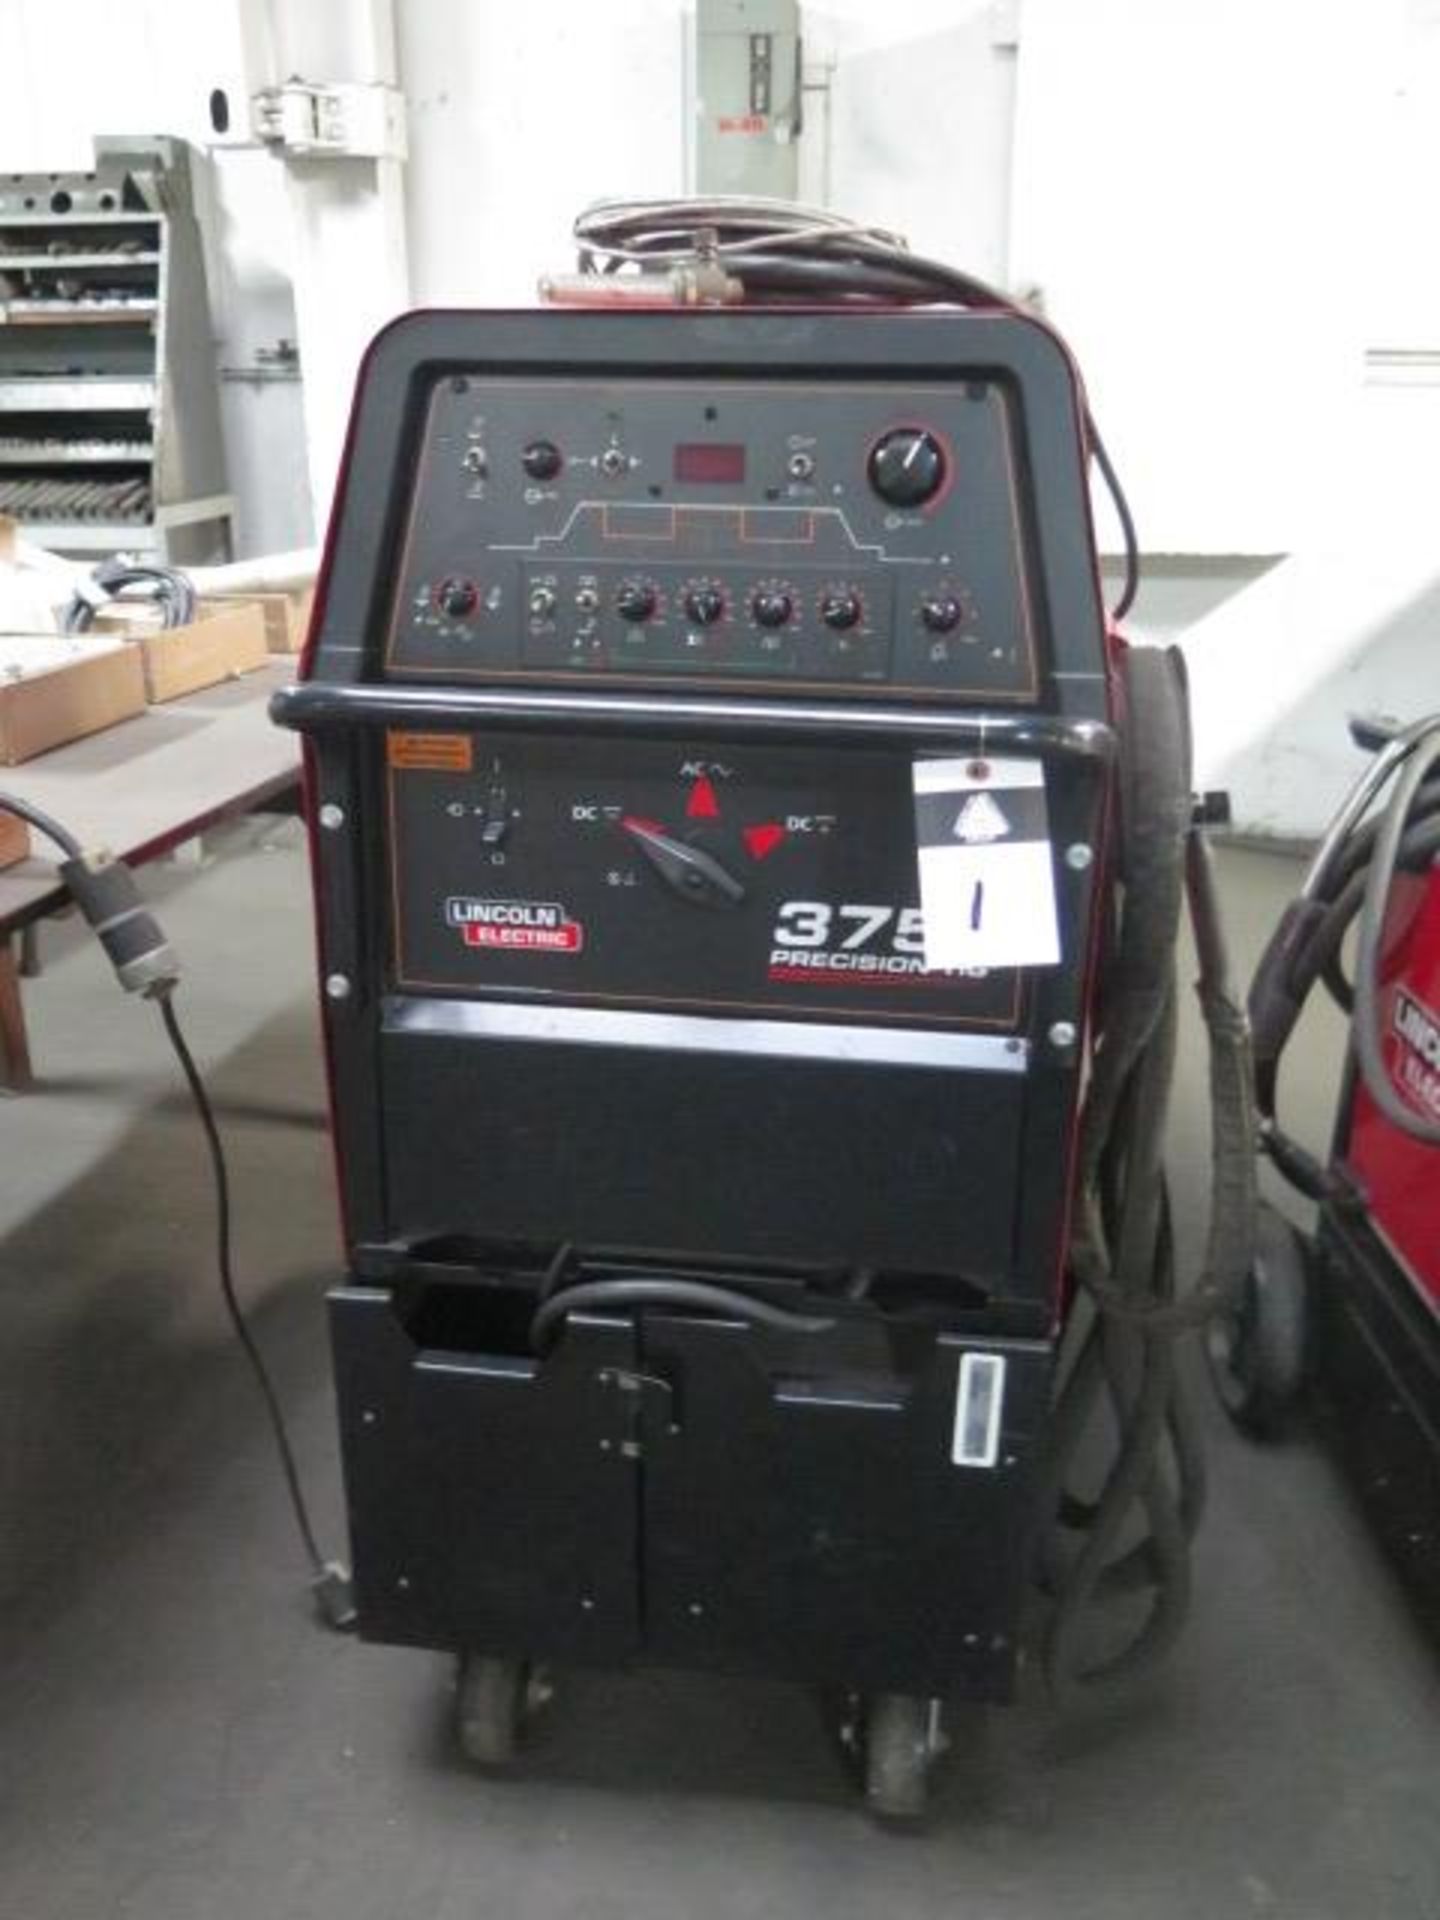 Lincoln Precision TIG 375 TIG Welding Power Source s/n U1131208373 (SOLD AS-IS - NO WARRANTY)